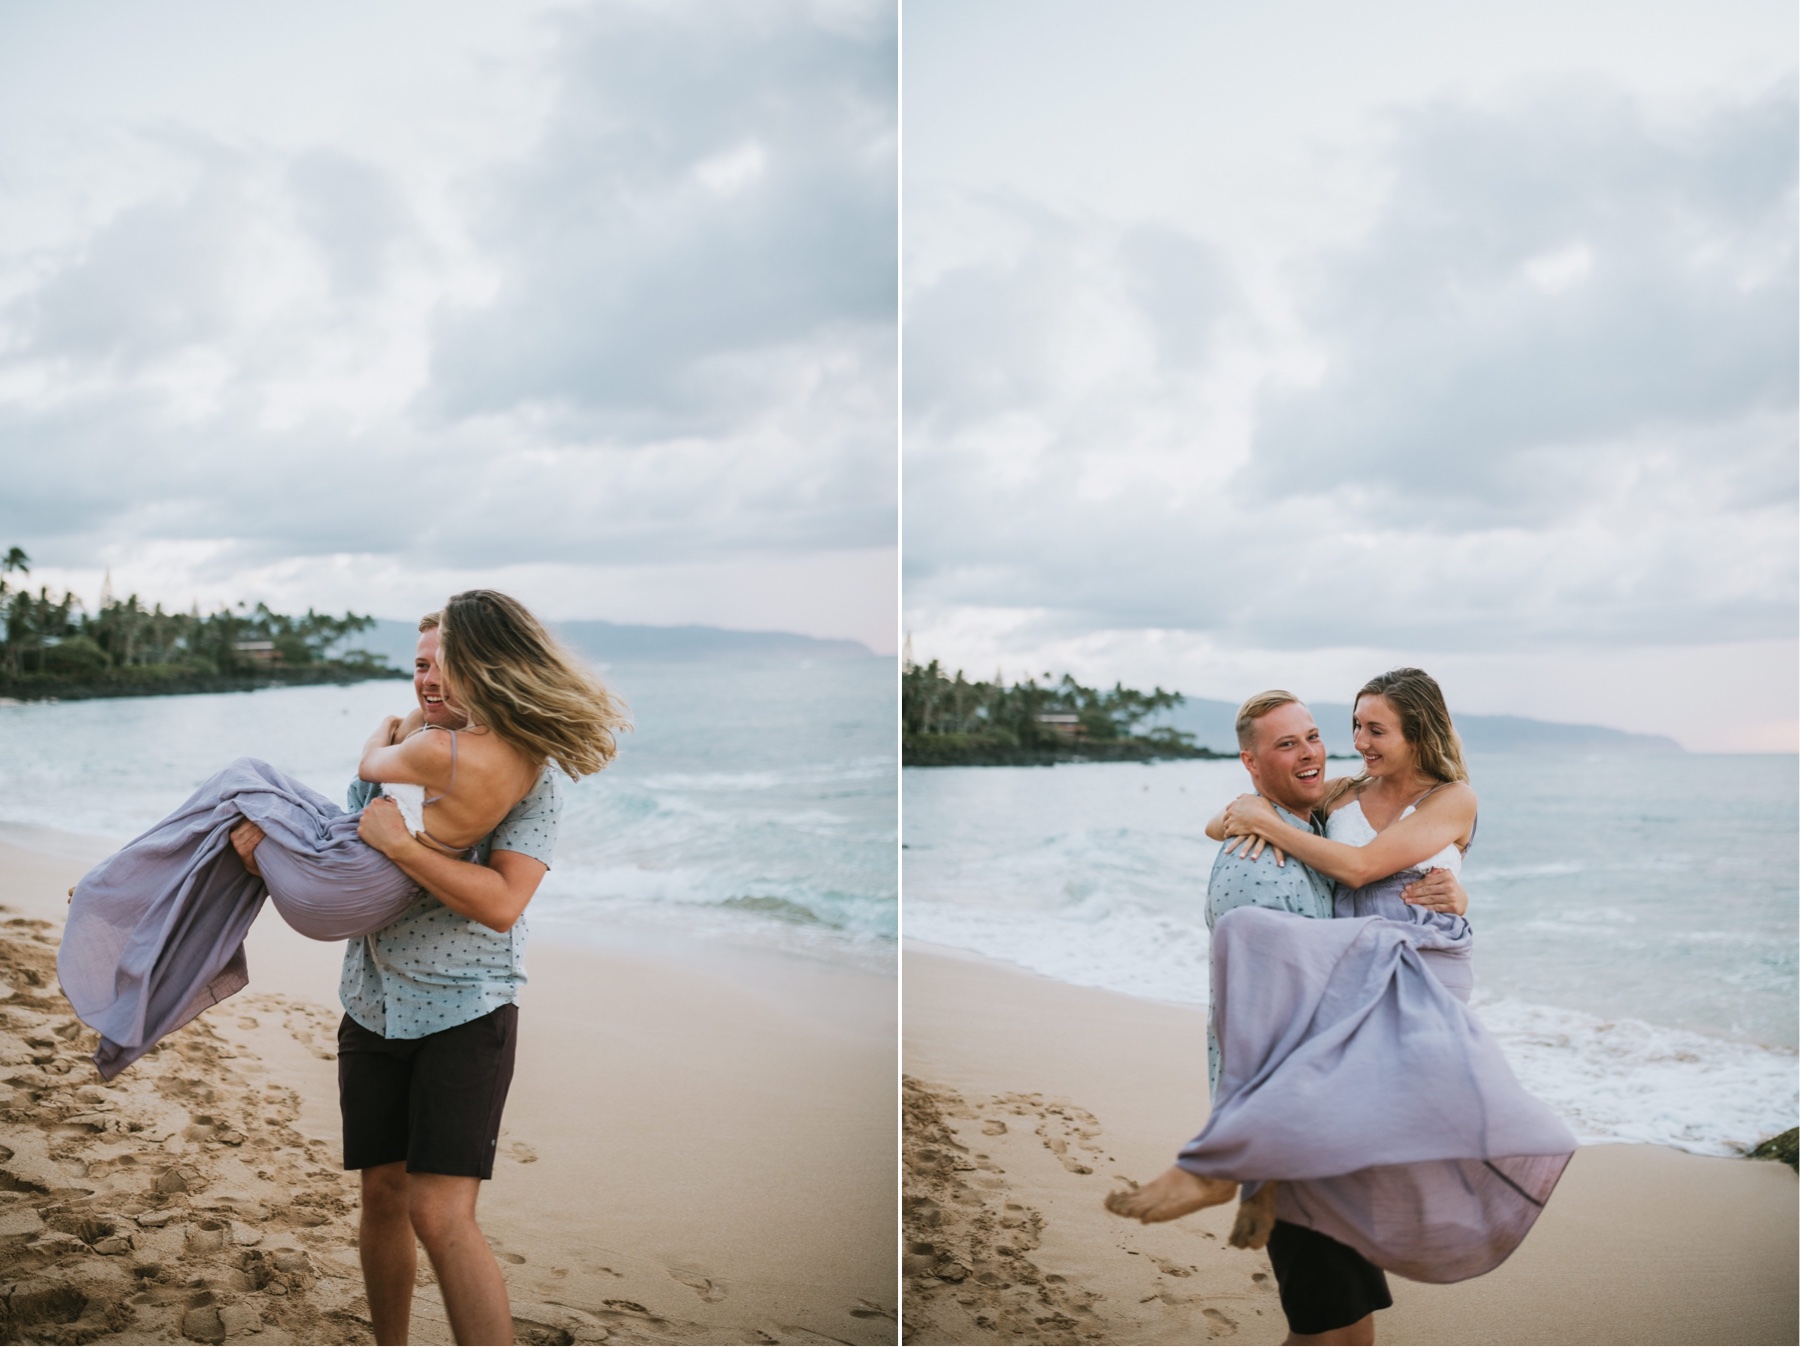 Series of images of a couple spinning on the beach and laughing